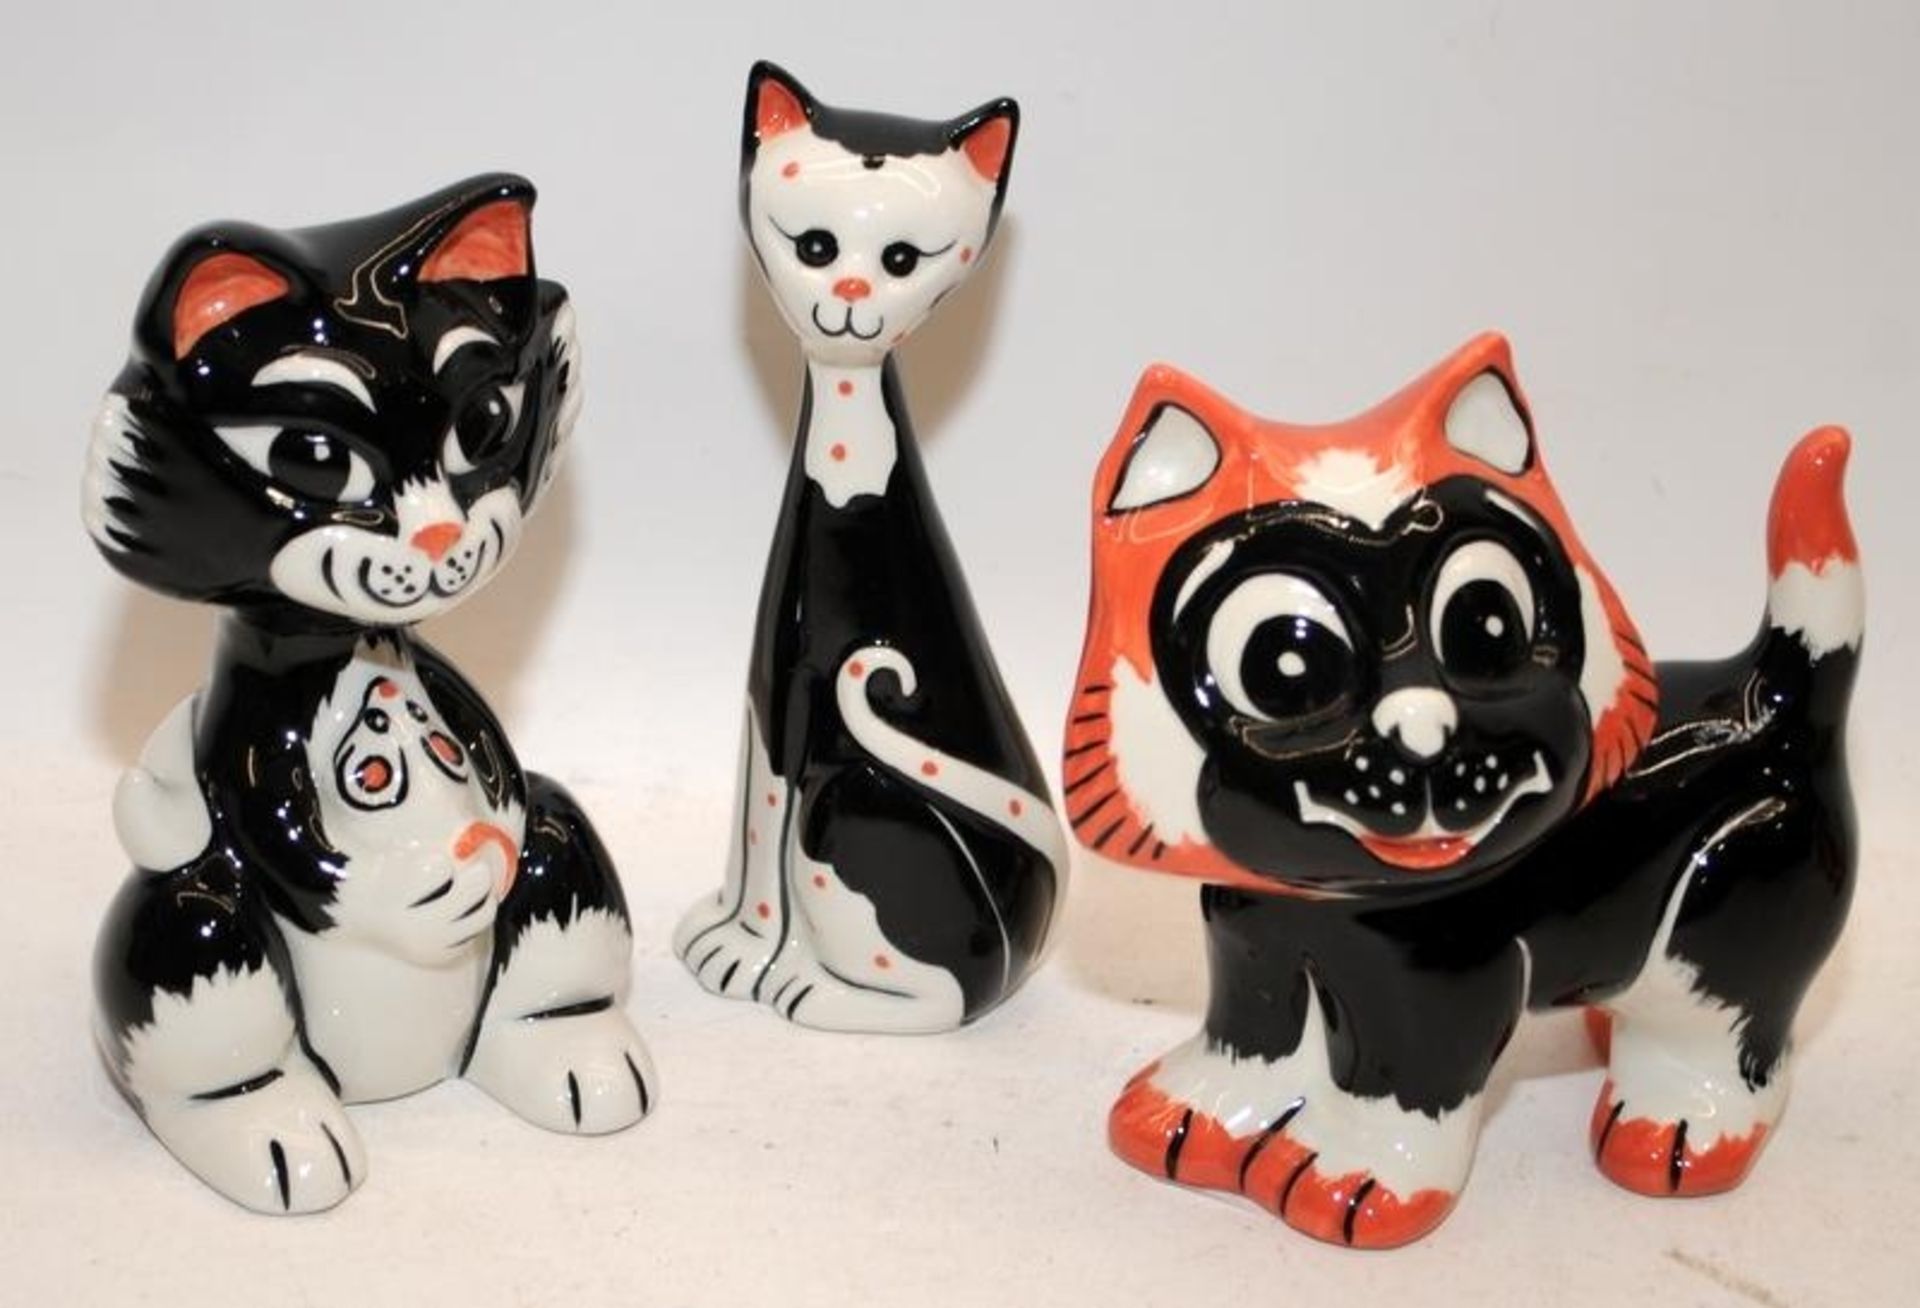 5 x Lorna Bailey cat figures: Sid, Gotcha, Cutie, Jaspurr and one other. All signed. - Image 2 of 3